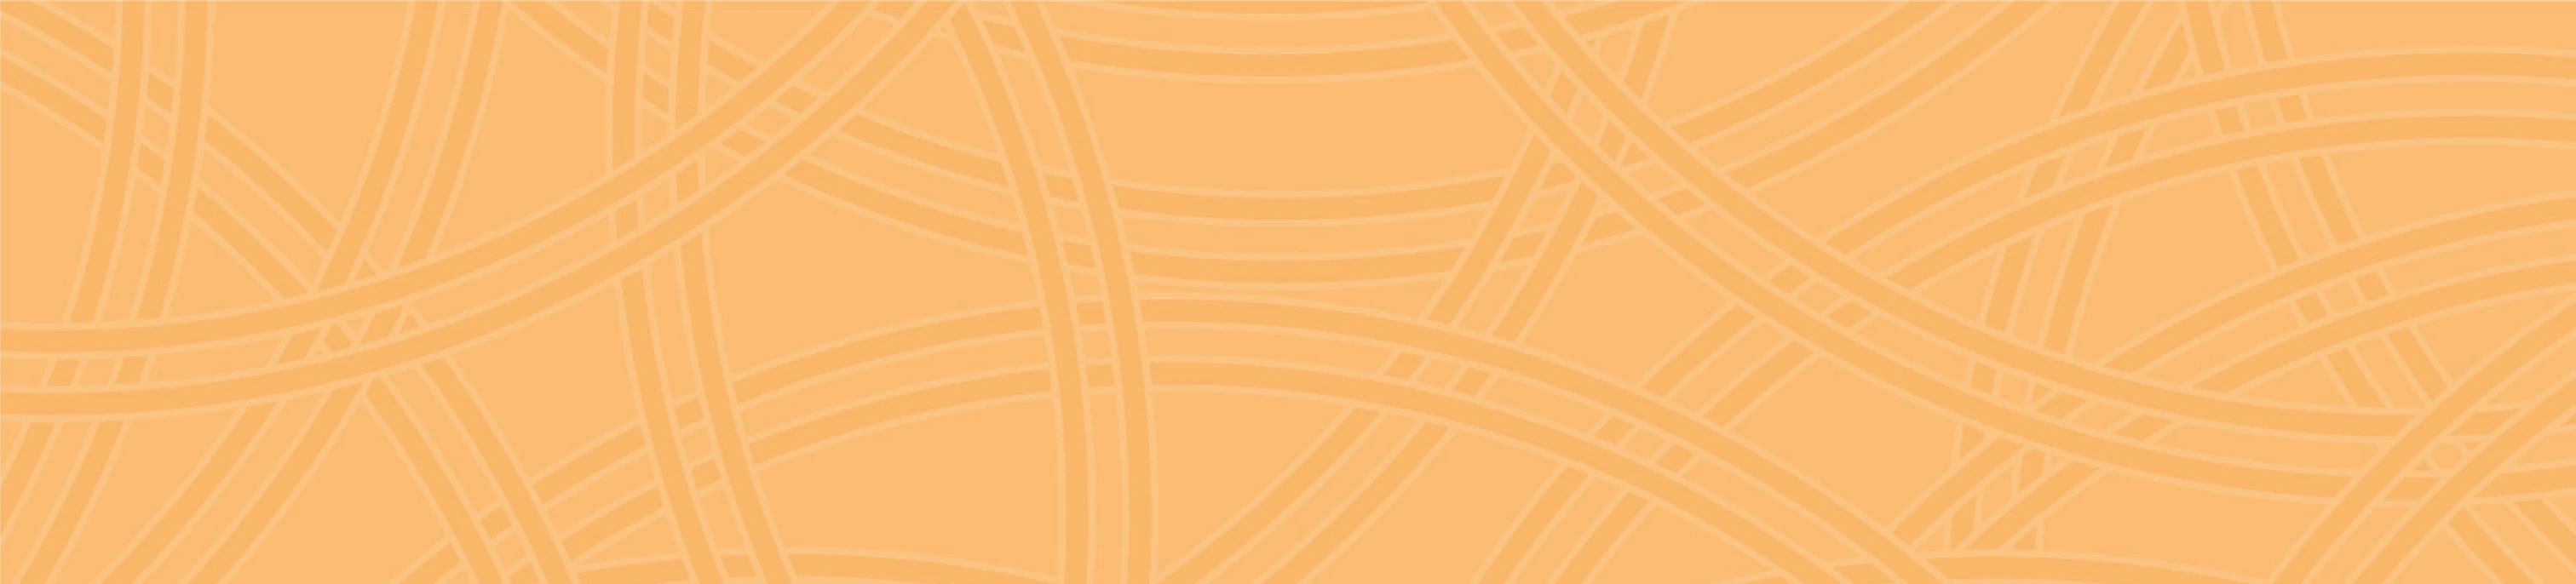 orange pattern with intersecting lines